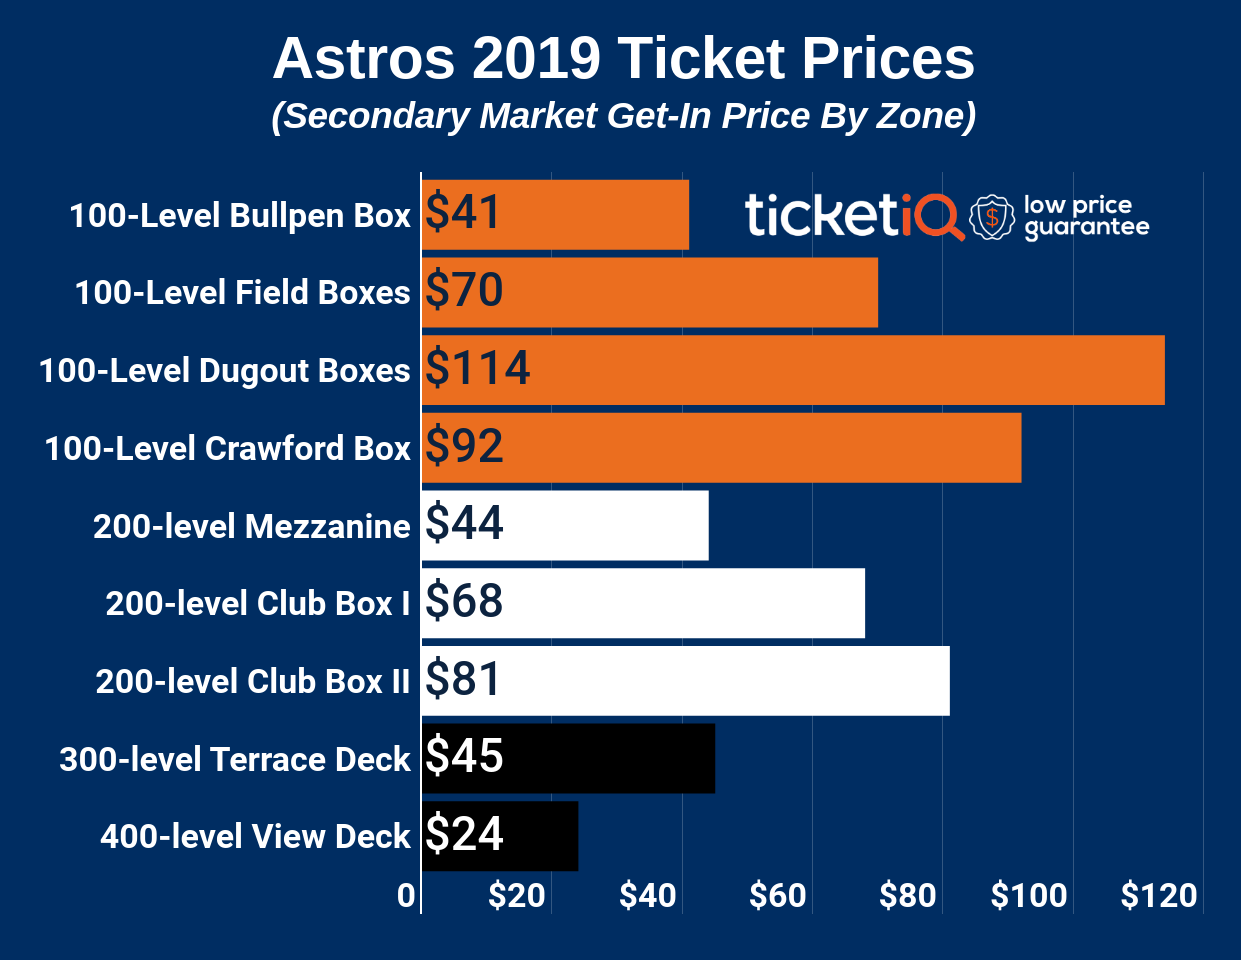 Houston Astros Tickets Seating Chart